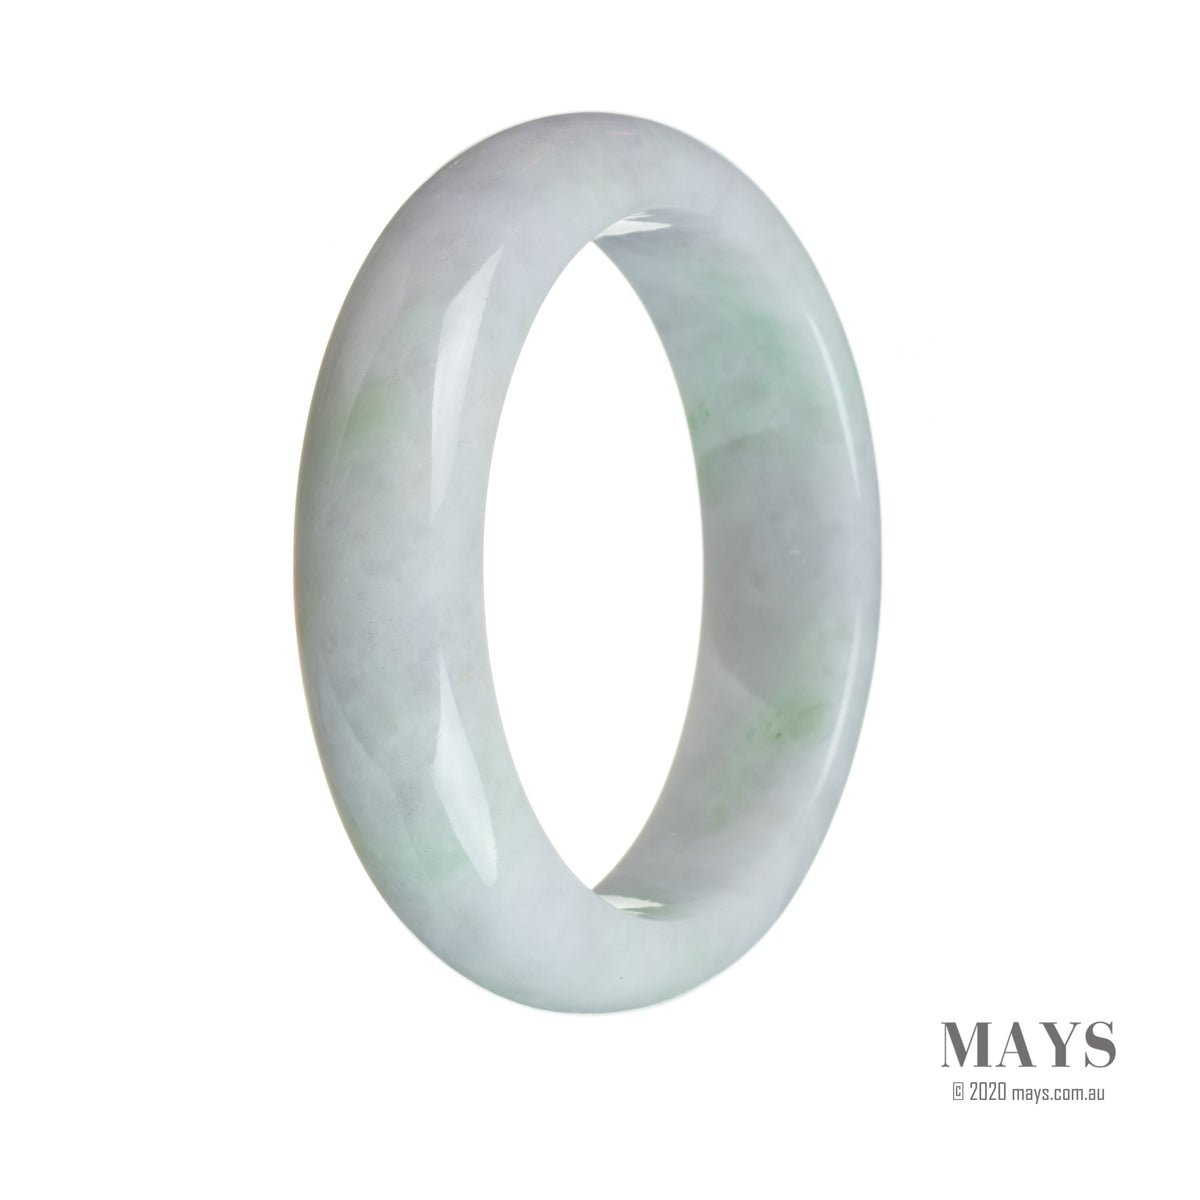 Close-up of a genuine Type A Lavender with green spots Jade Bracelet - 58mm Half Moon by MAYS™